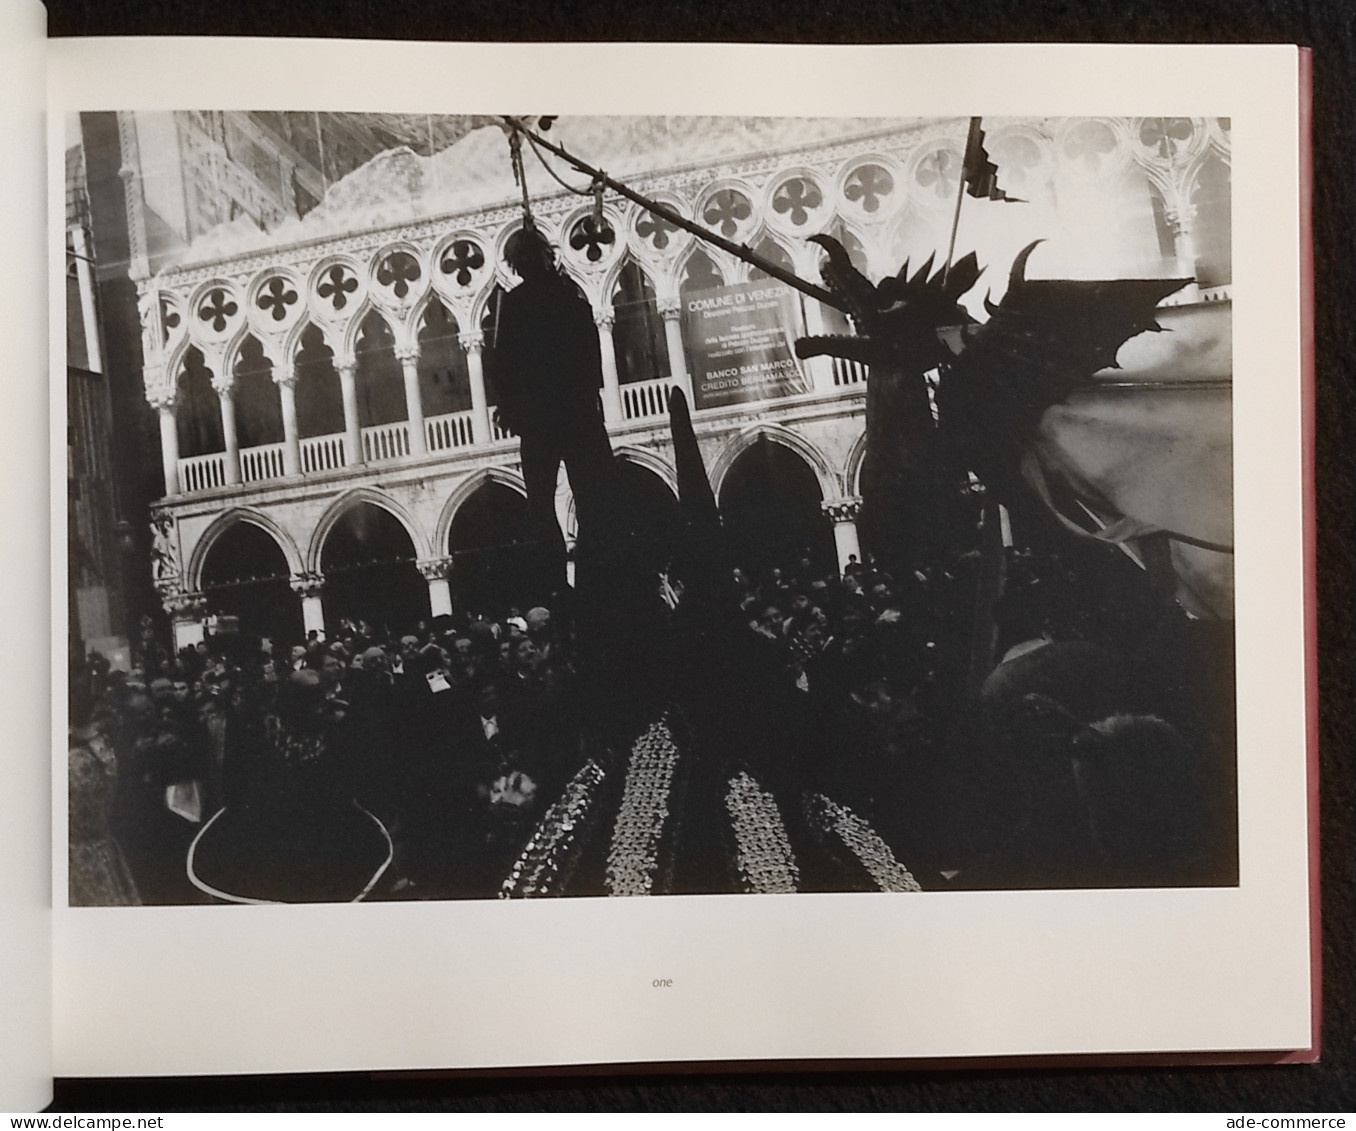 Venice-Carnival Unmasked - Pericles Boutos - Charta - 1998 - Fotografie